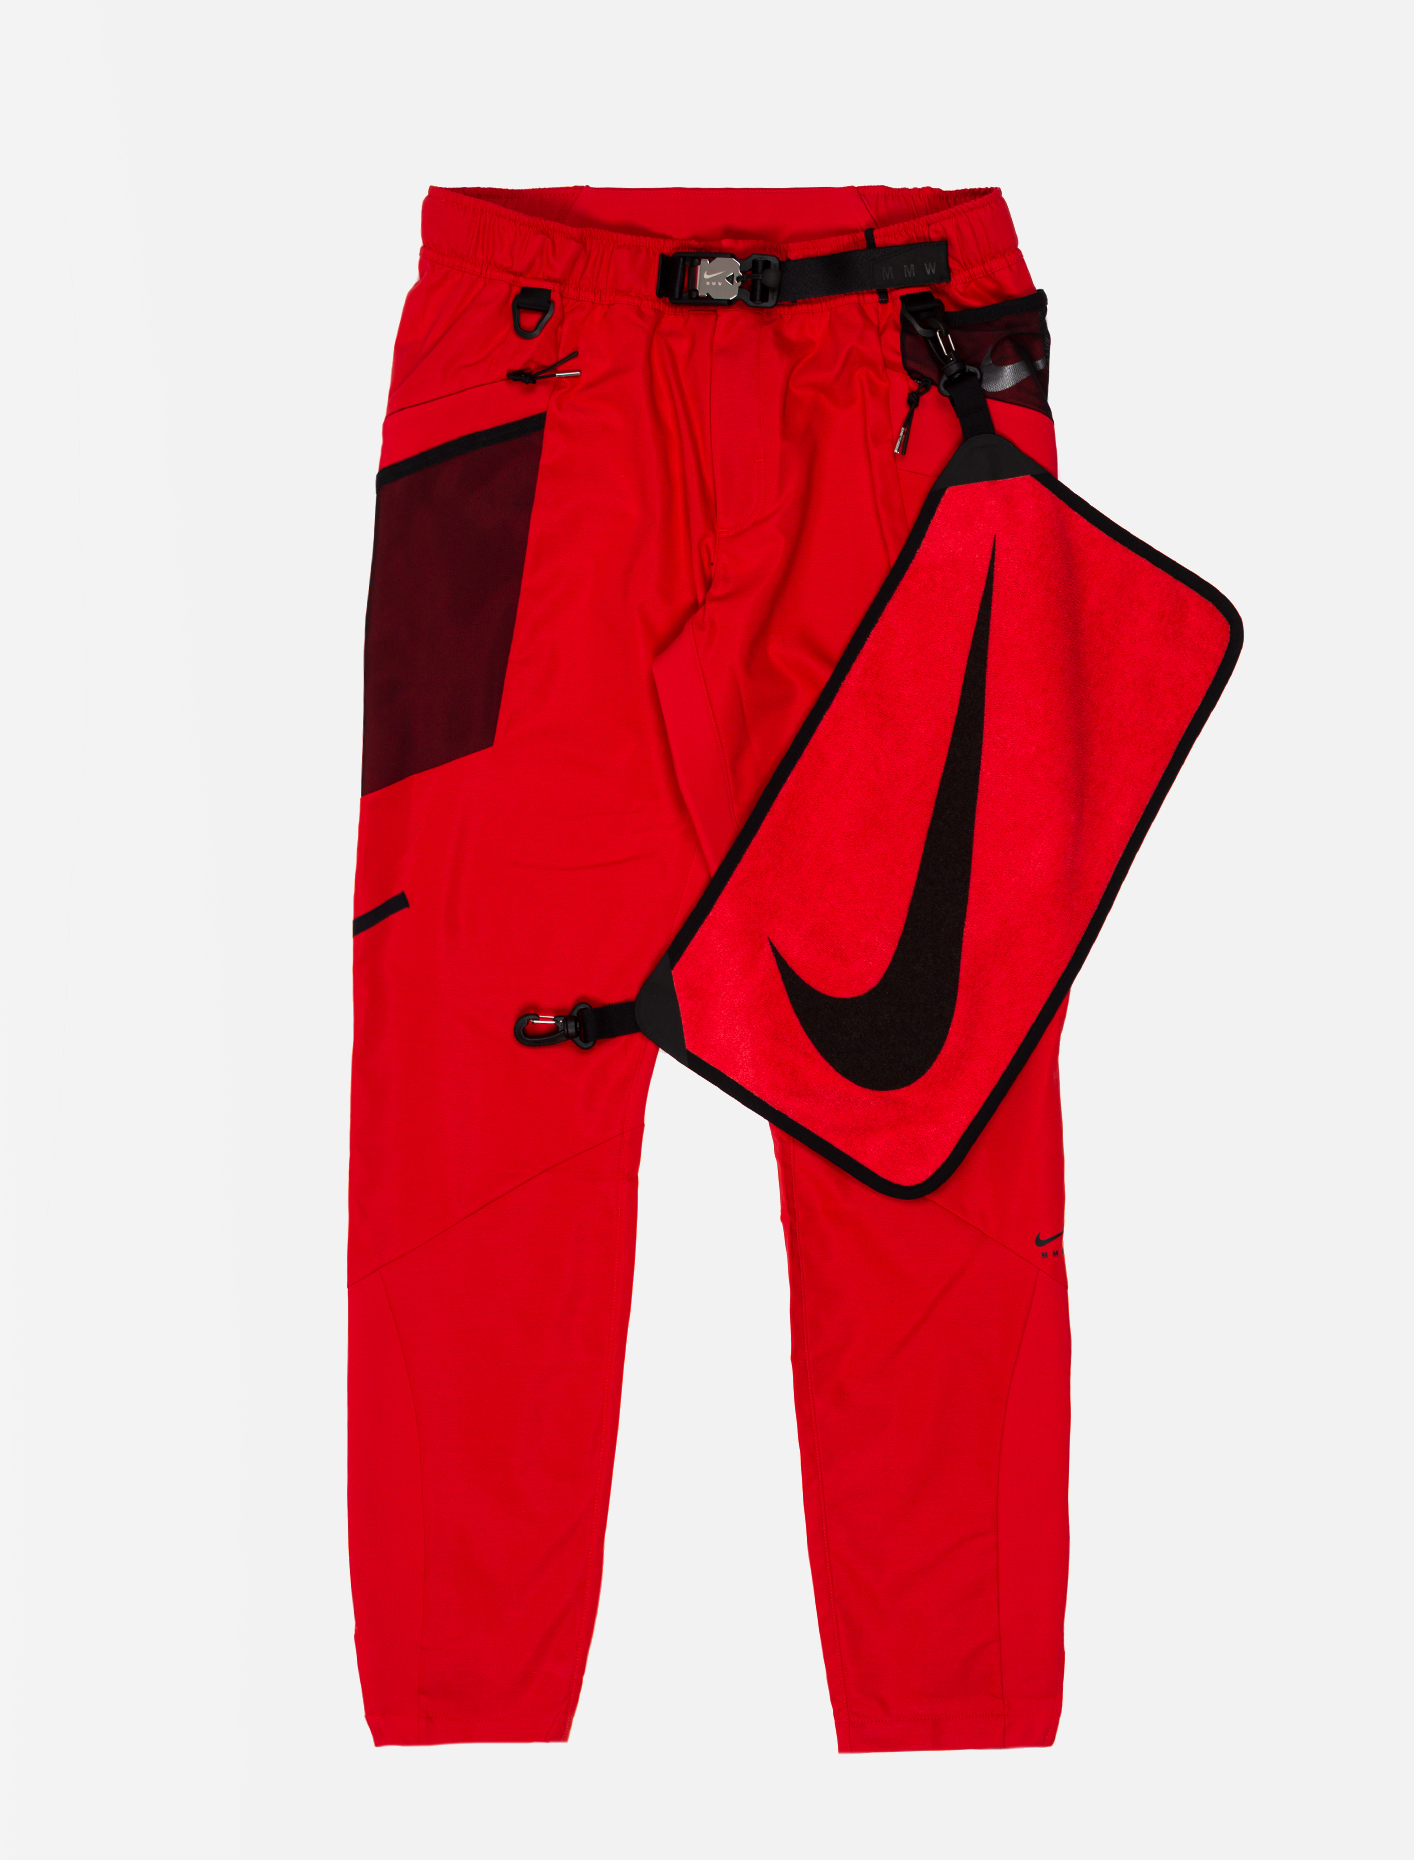 Archive Nike x MMW Trousers | Voo Store 